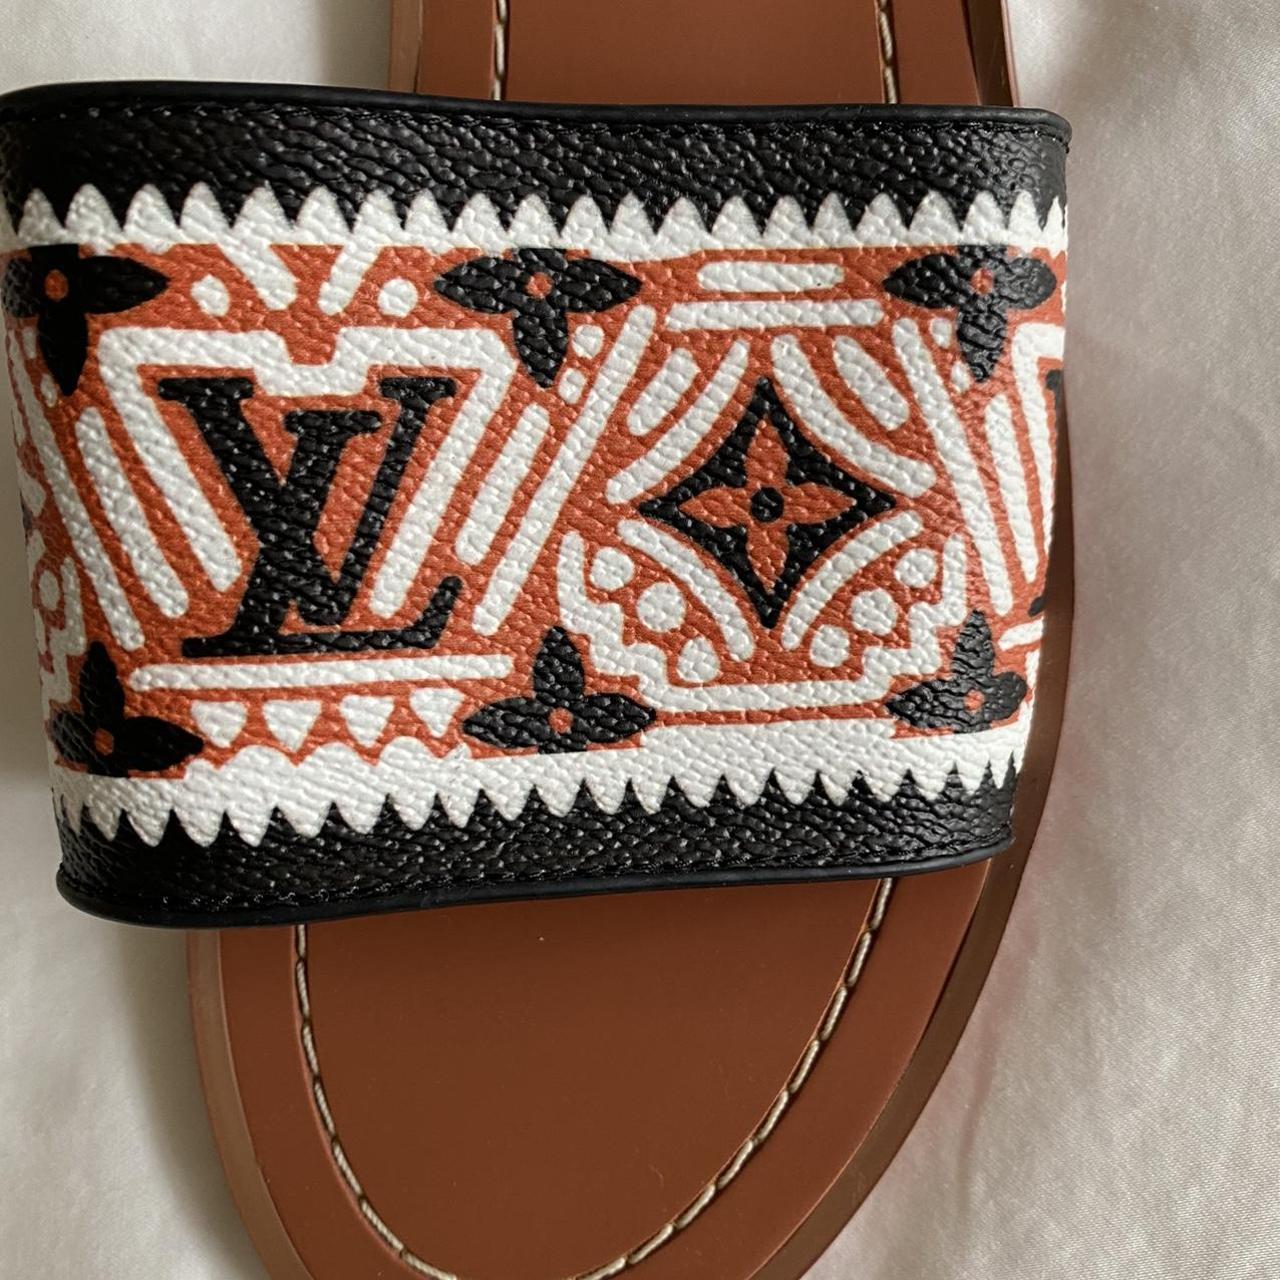 Louis Vuitton Sandals, Retail price is $885 and is